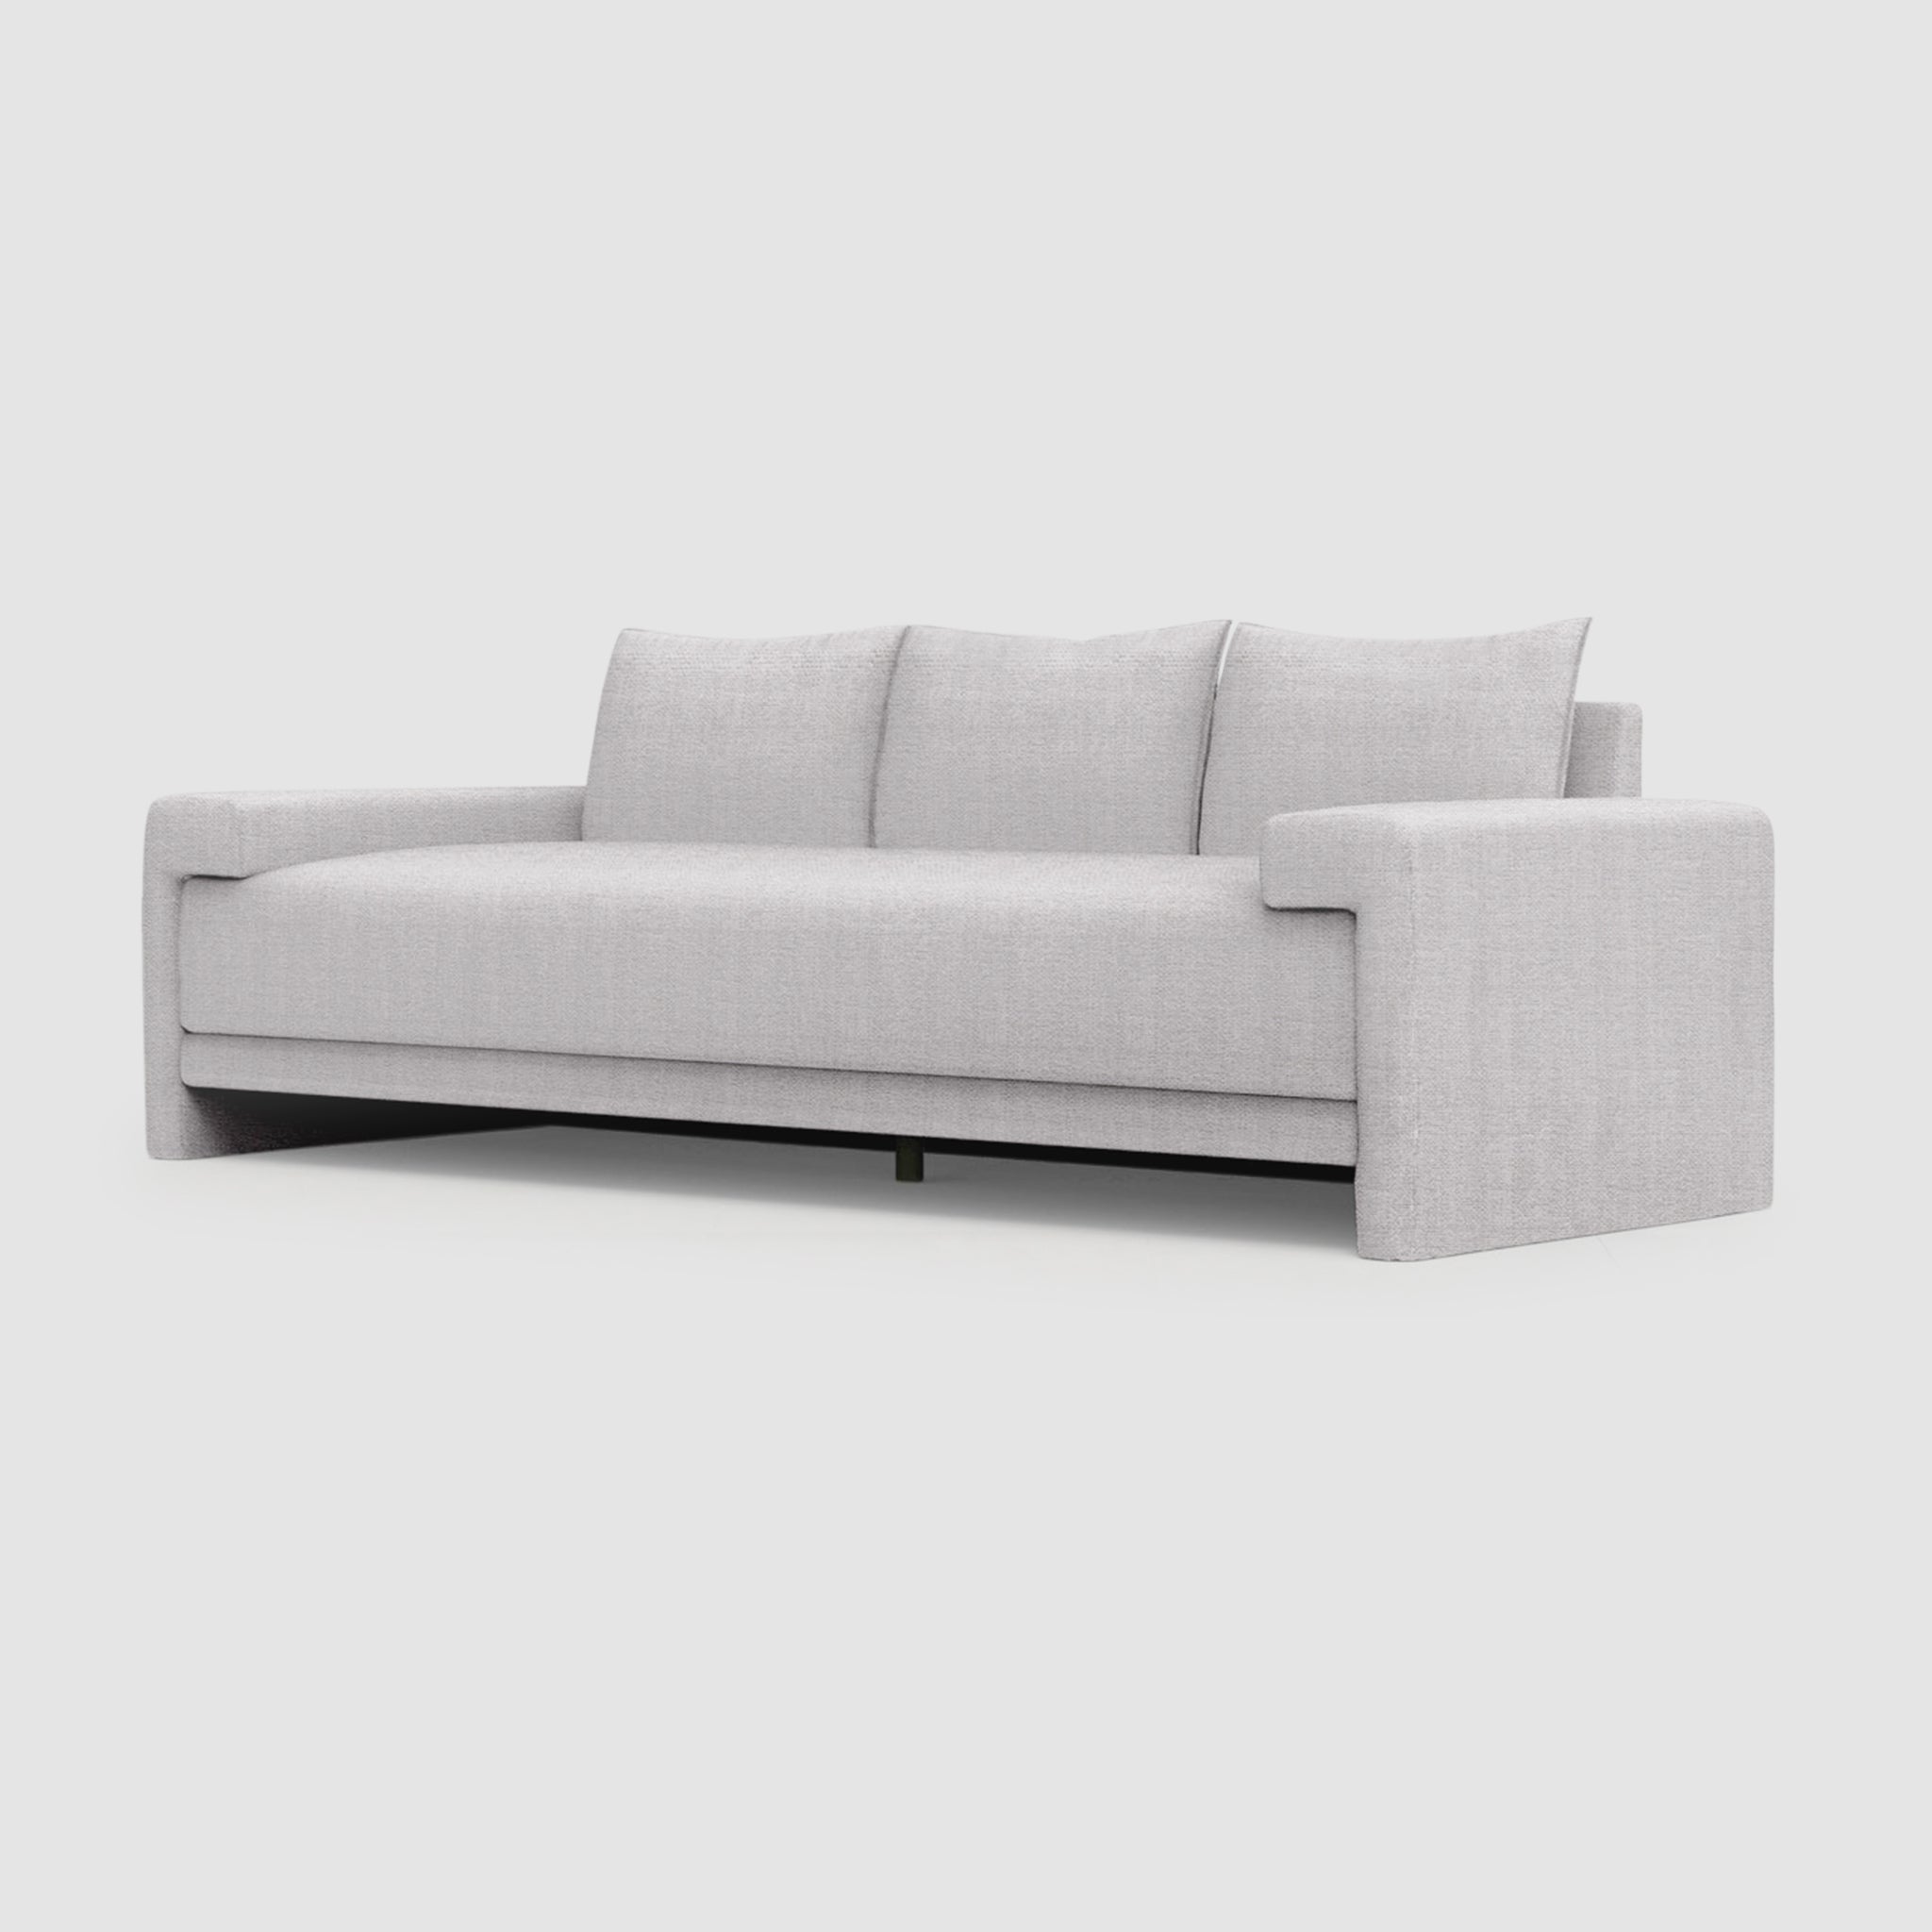 A long, modern sofa with a modern design. It has three large, plush back cushions and two square throw pillows. The arms are straight and the sofa sits on a lifted base with curved black metal legs.